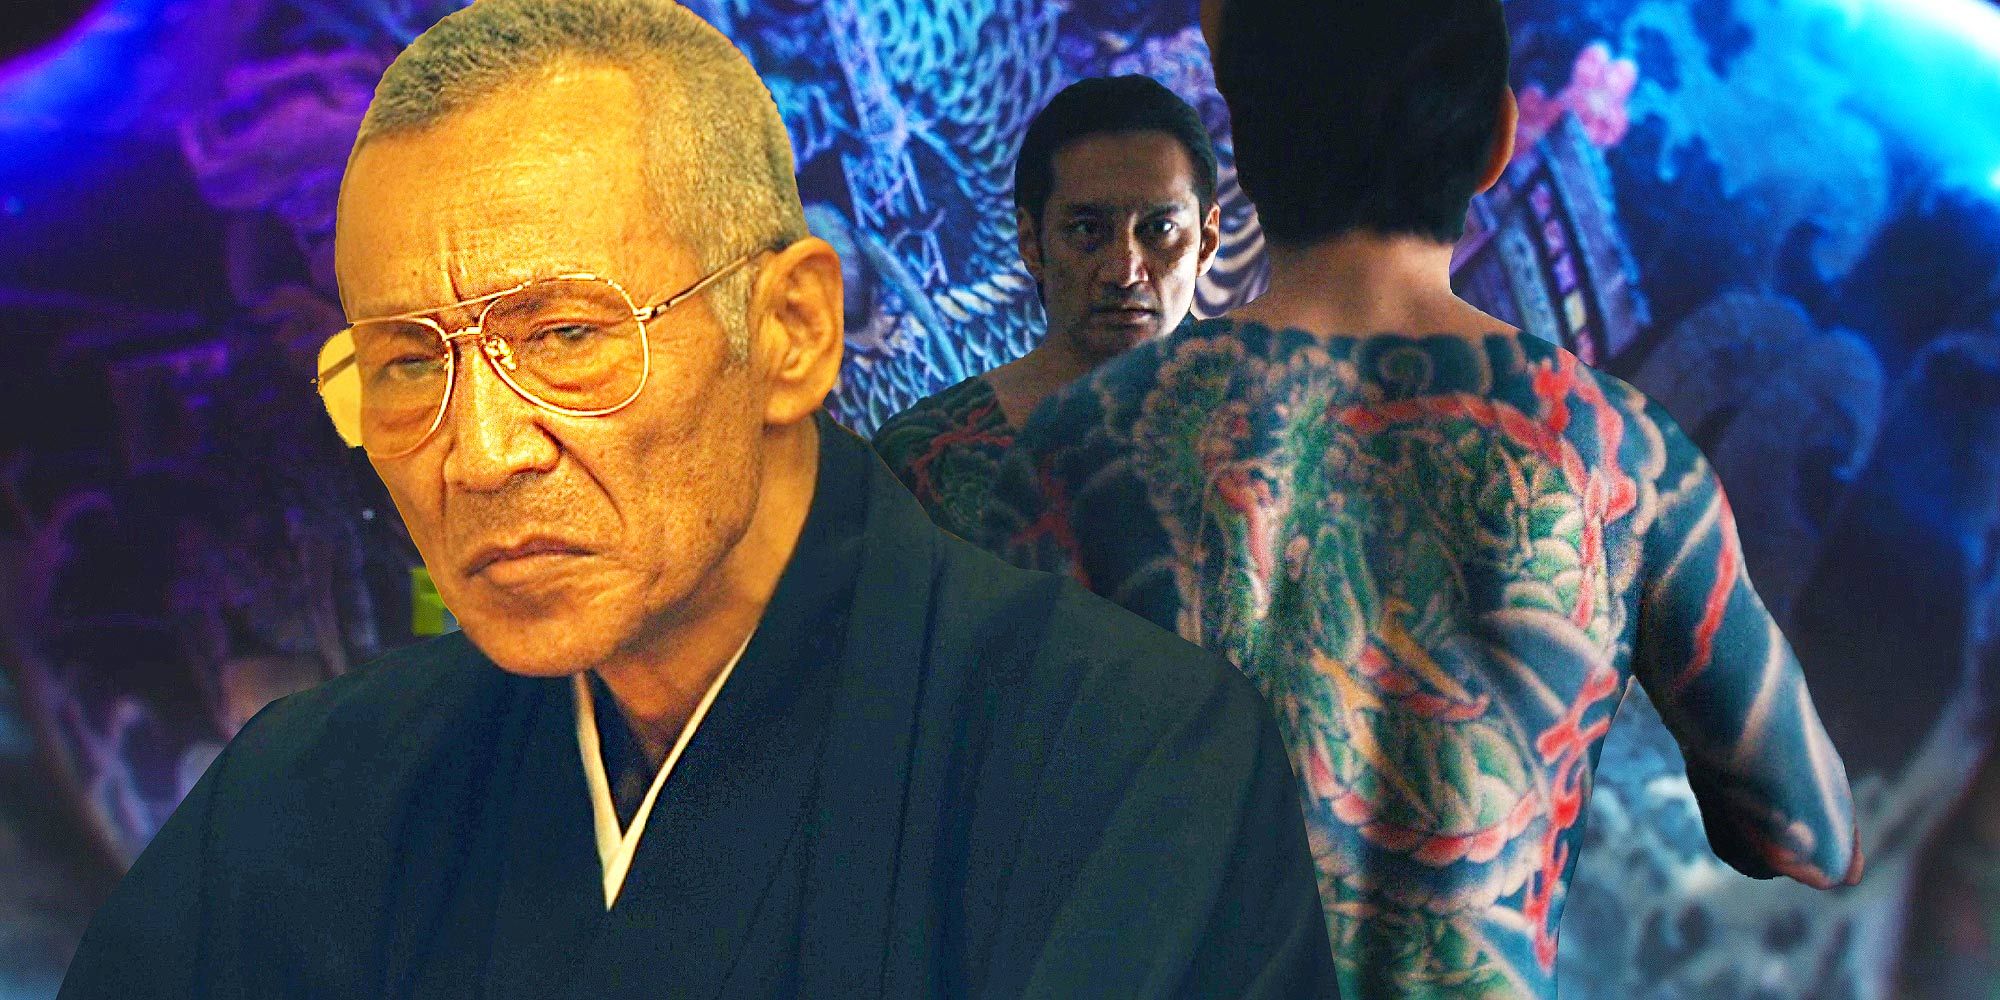 How the Yakuza Changed Tattoo Culture in Japan  VICE Video Documentaries  Films News Videos